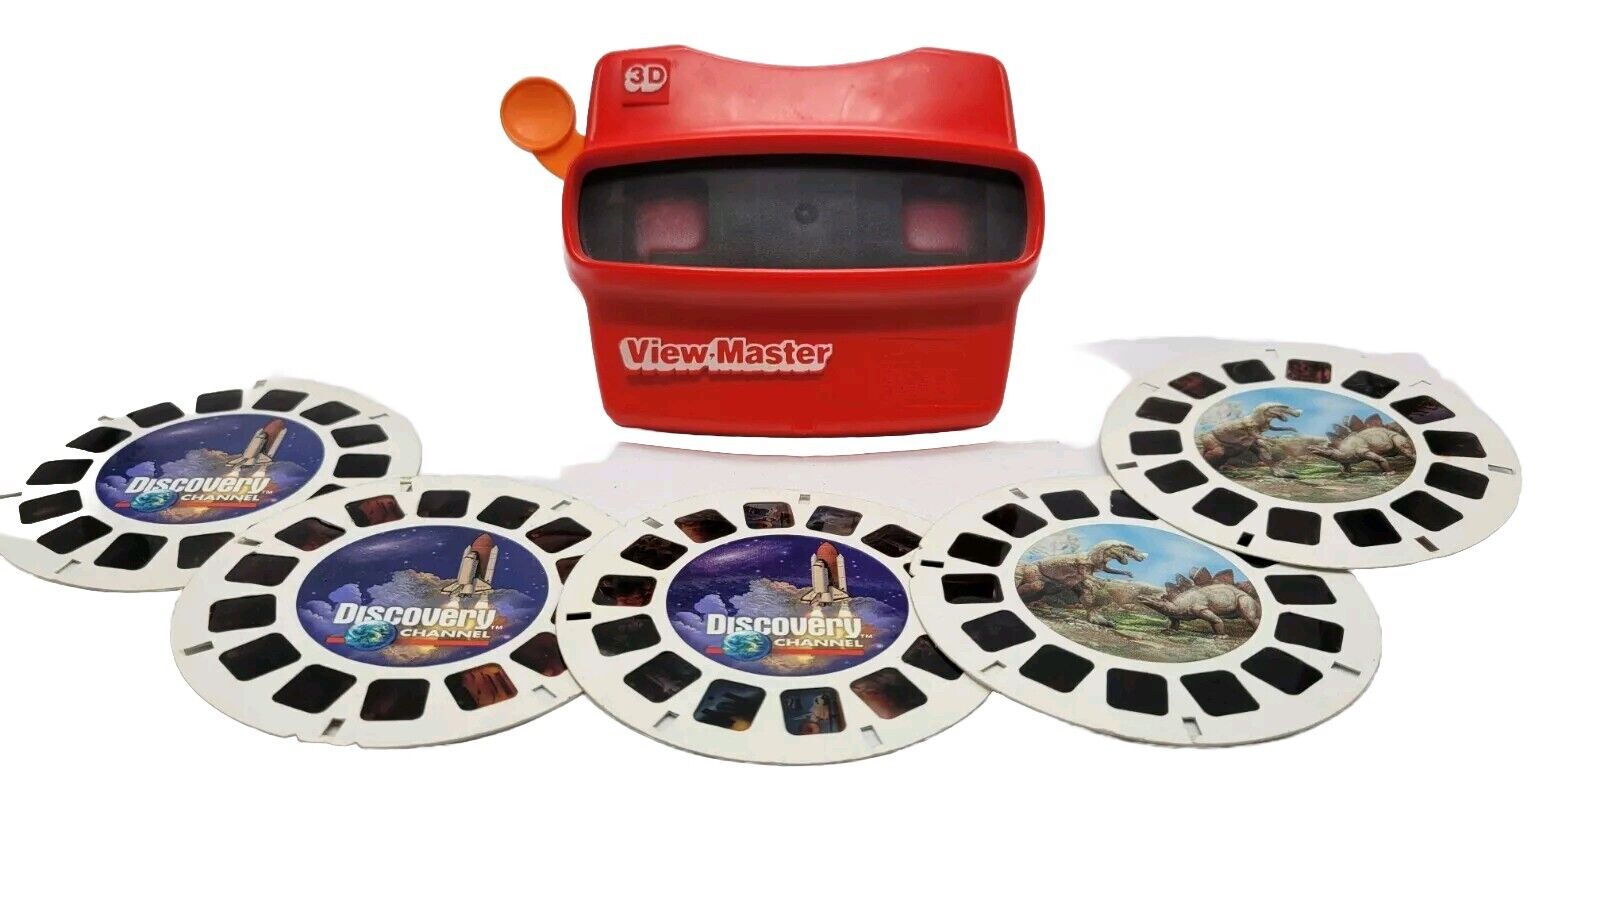 Vintage View Master 3D Viewer Red Classic Viewmaster Toy Slide Viewer USA